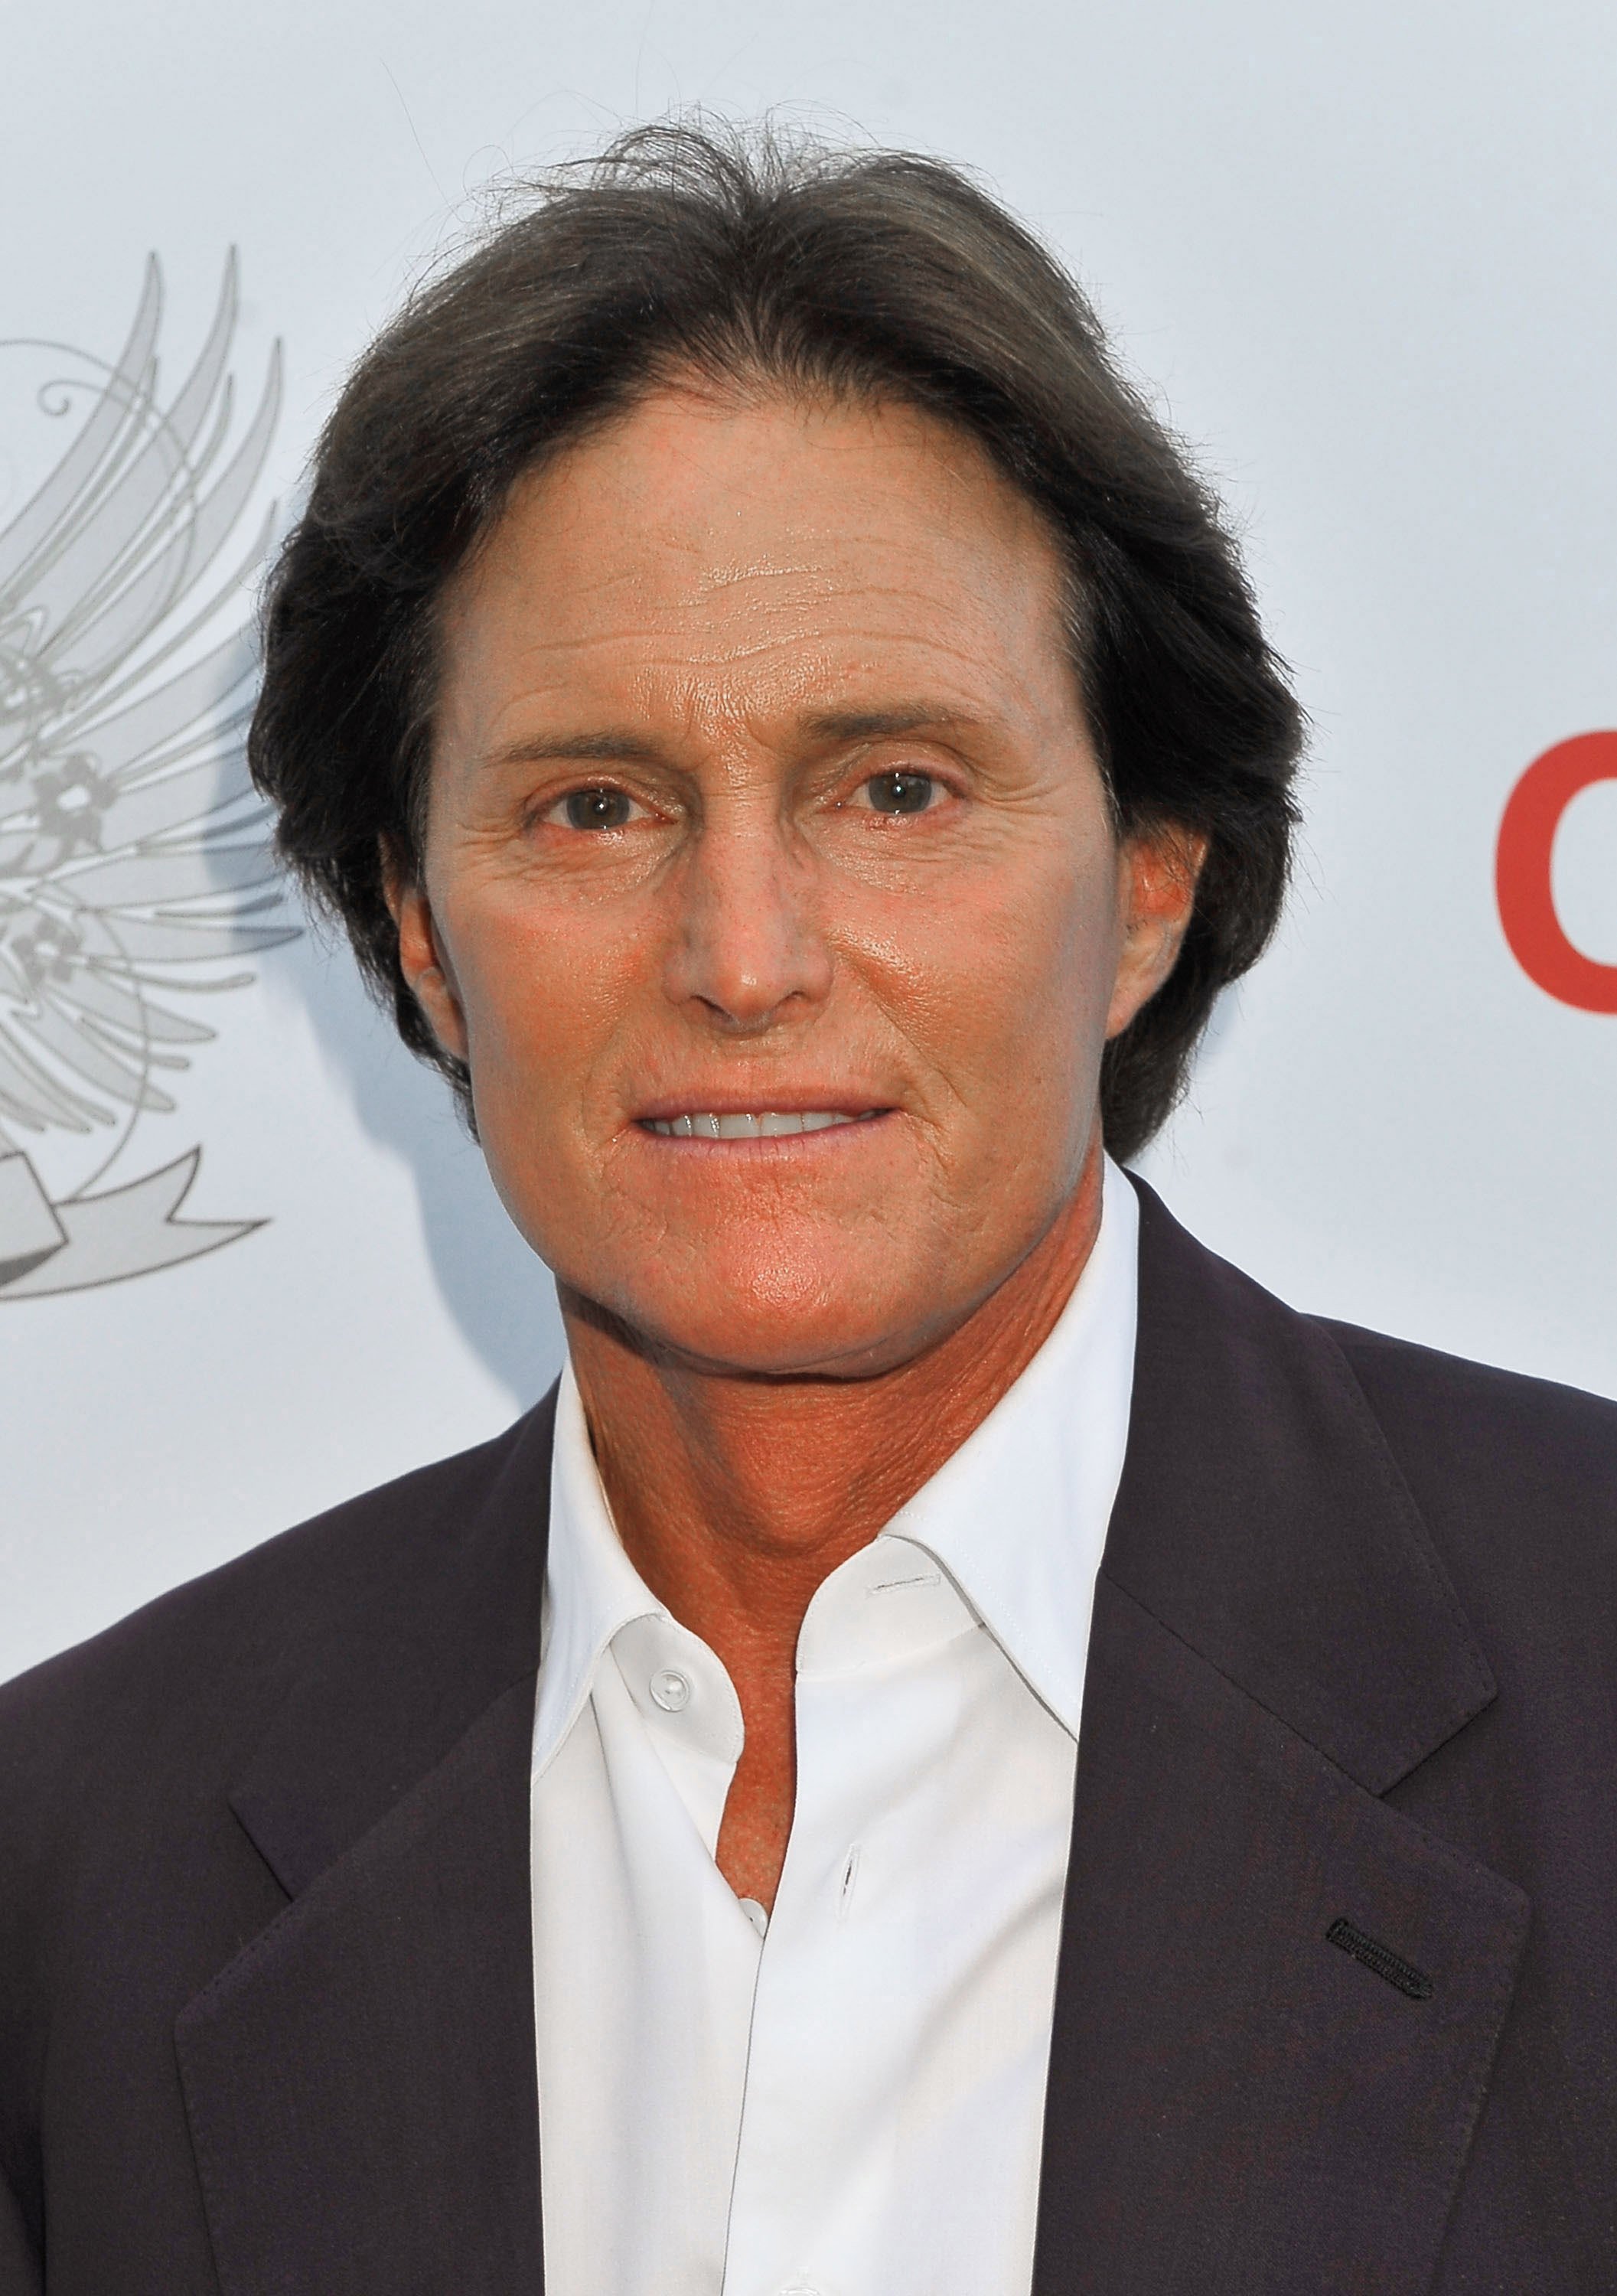 Bruce Jenner arrives at the Aces & Angels Celebrity Poker Party at The Playboy Mansion on July 11, 2009 in Beverly Hills, California | Photo: GettyImages